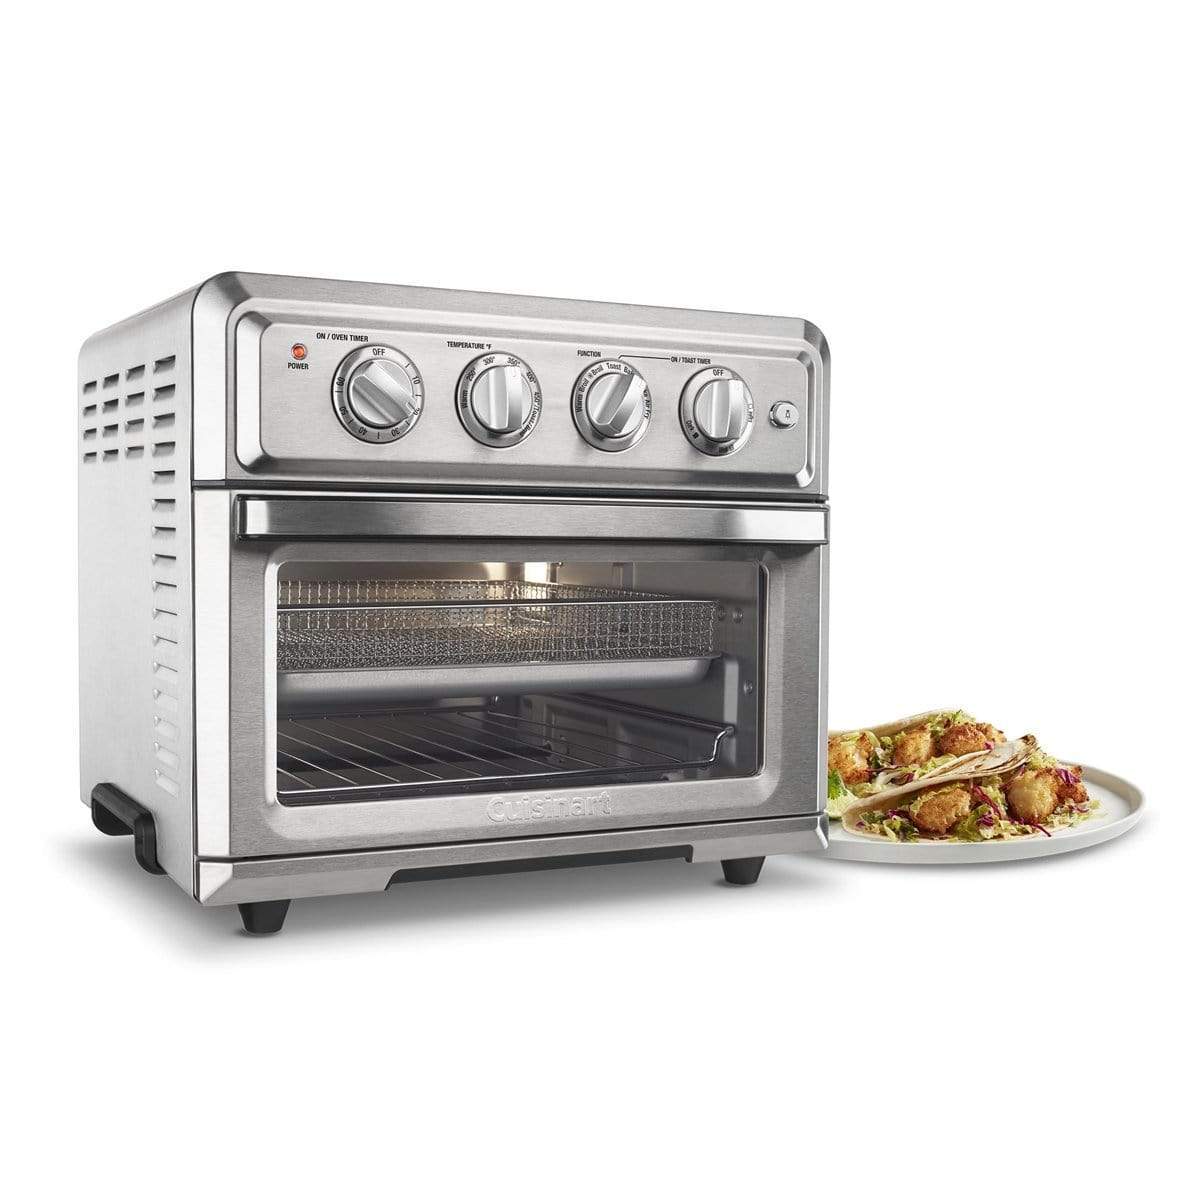 Large Digital Air Fryer Toaster Oven (Stainless Steel), Cuisinart